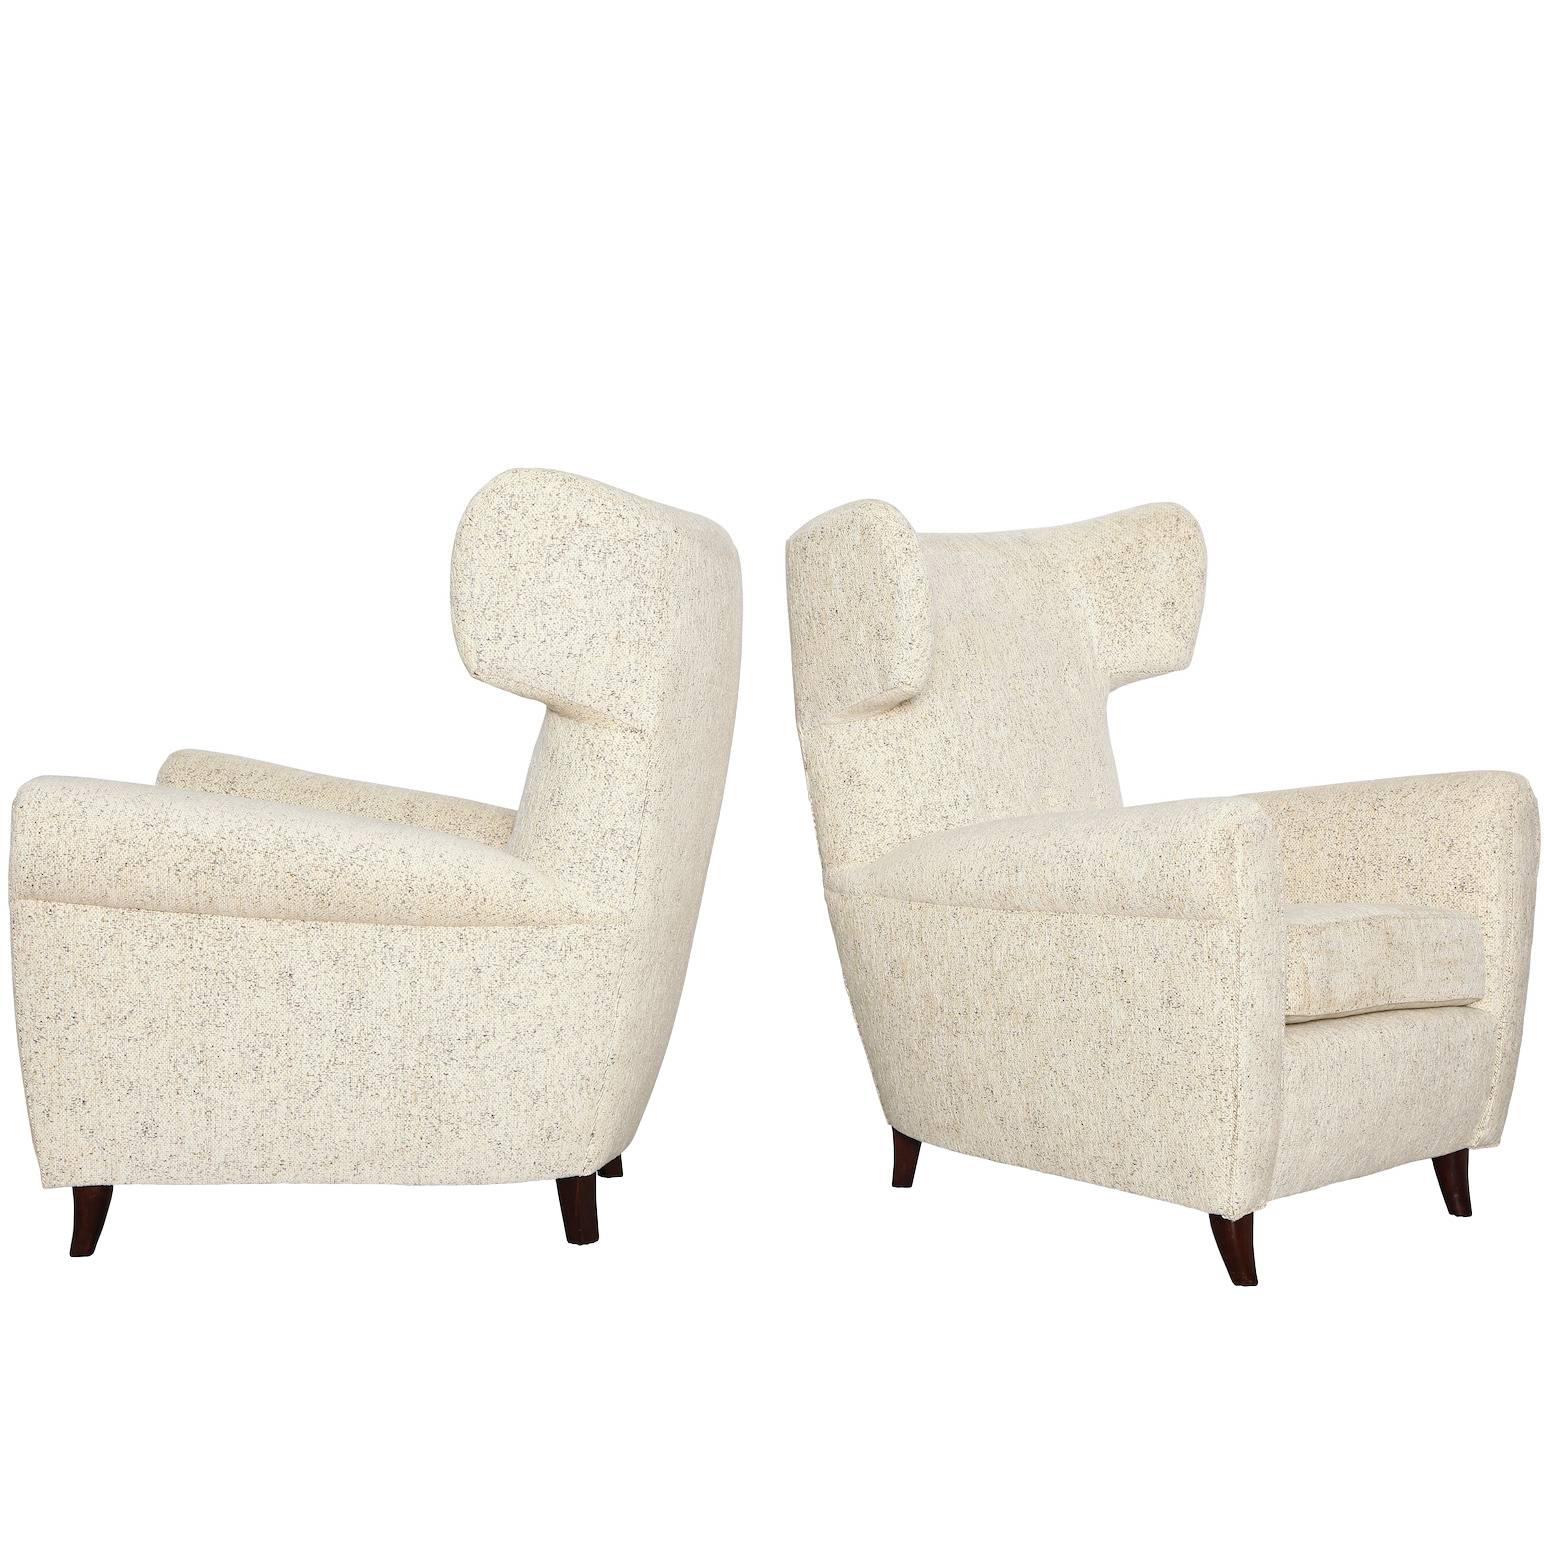 Pair of Modernist Wing Chairs